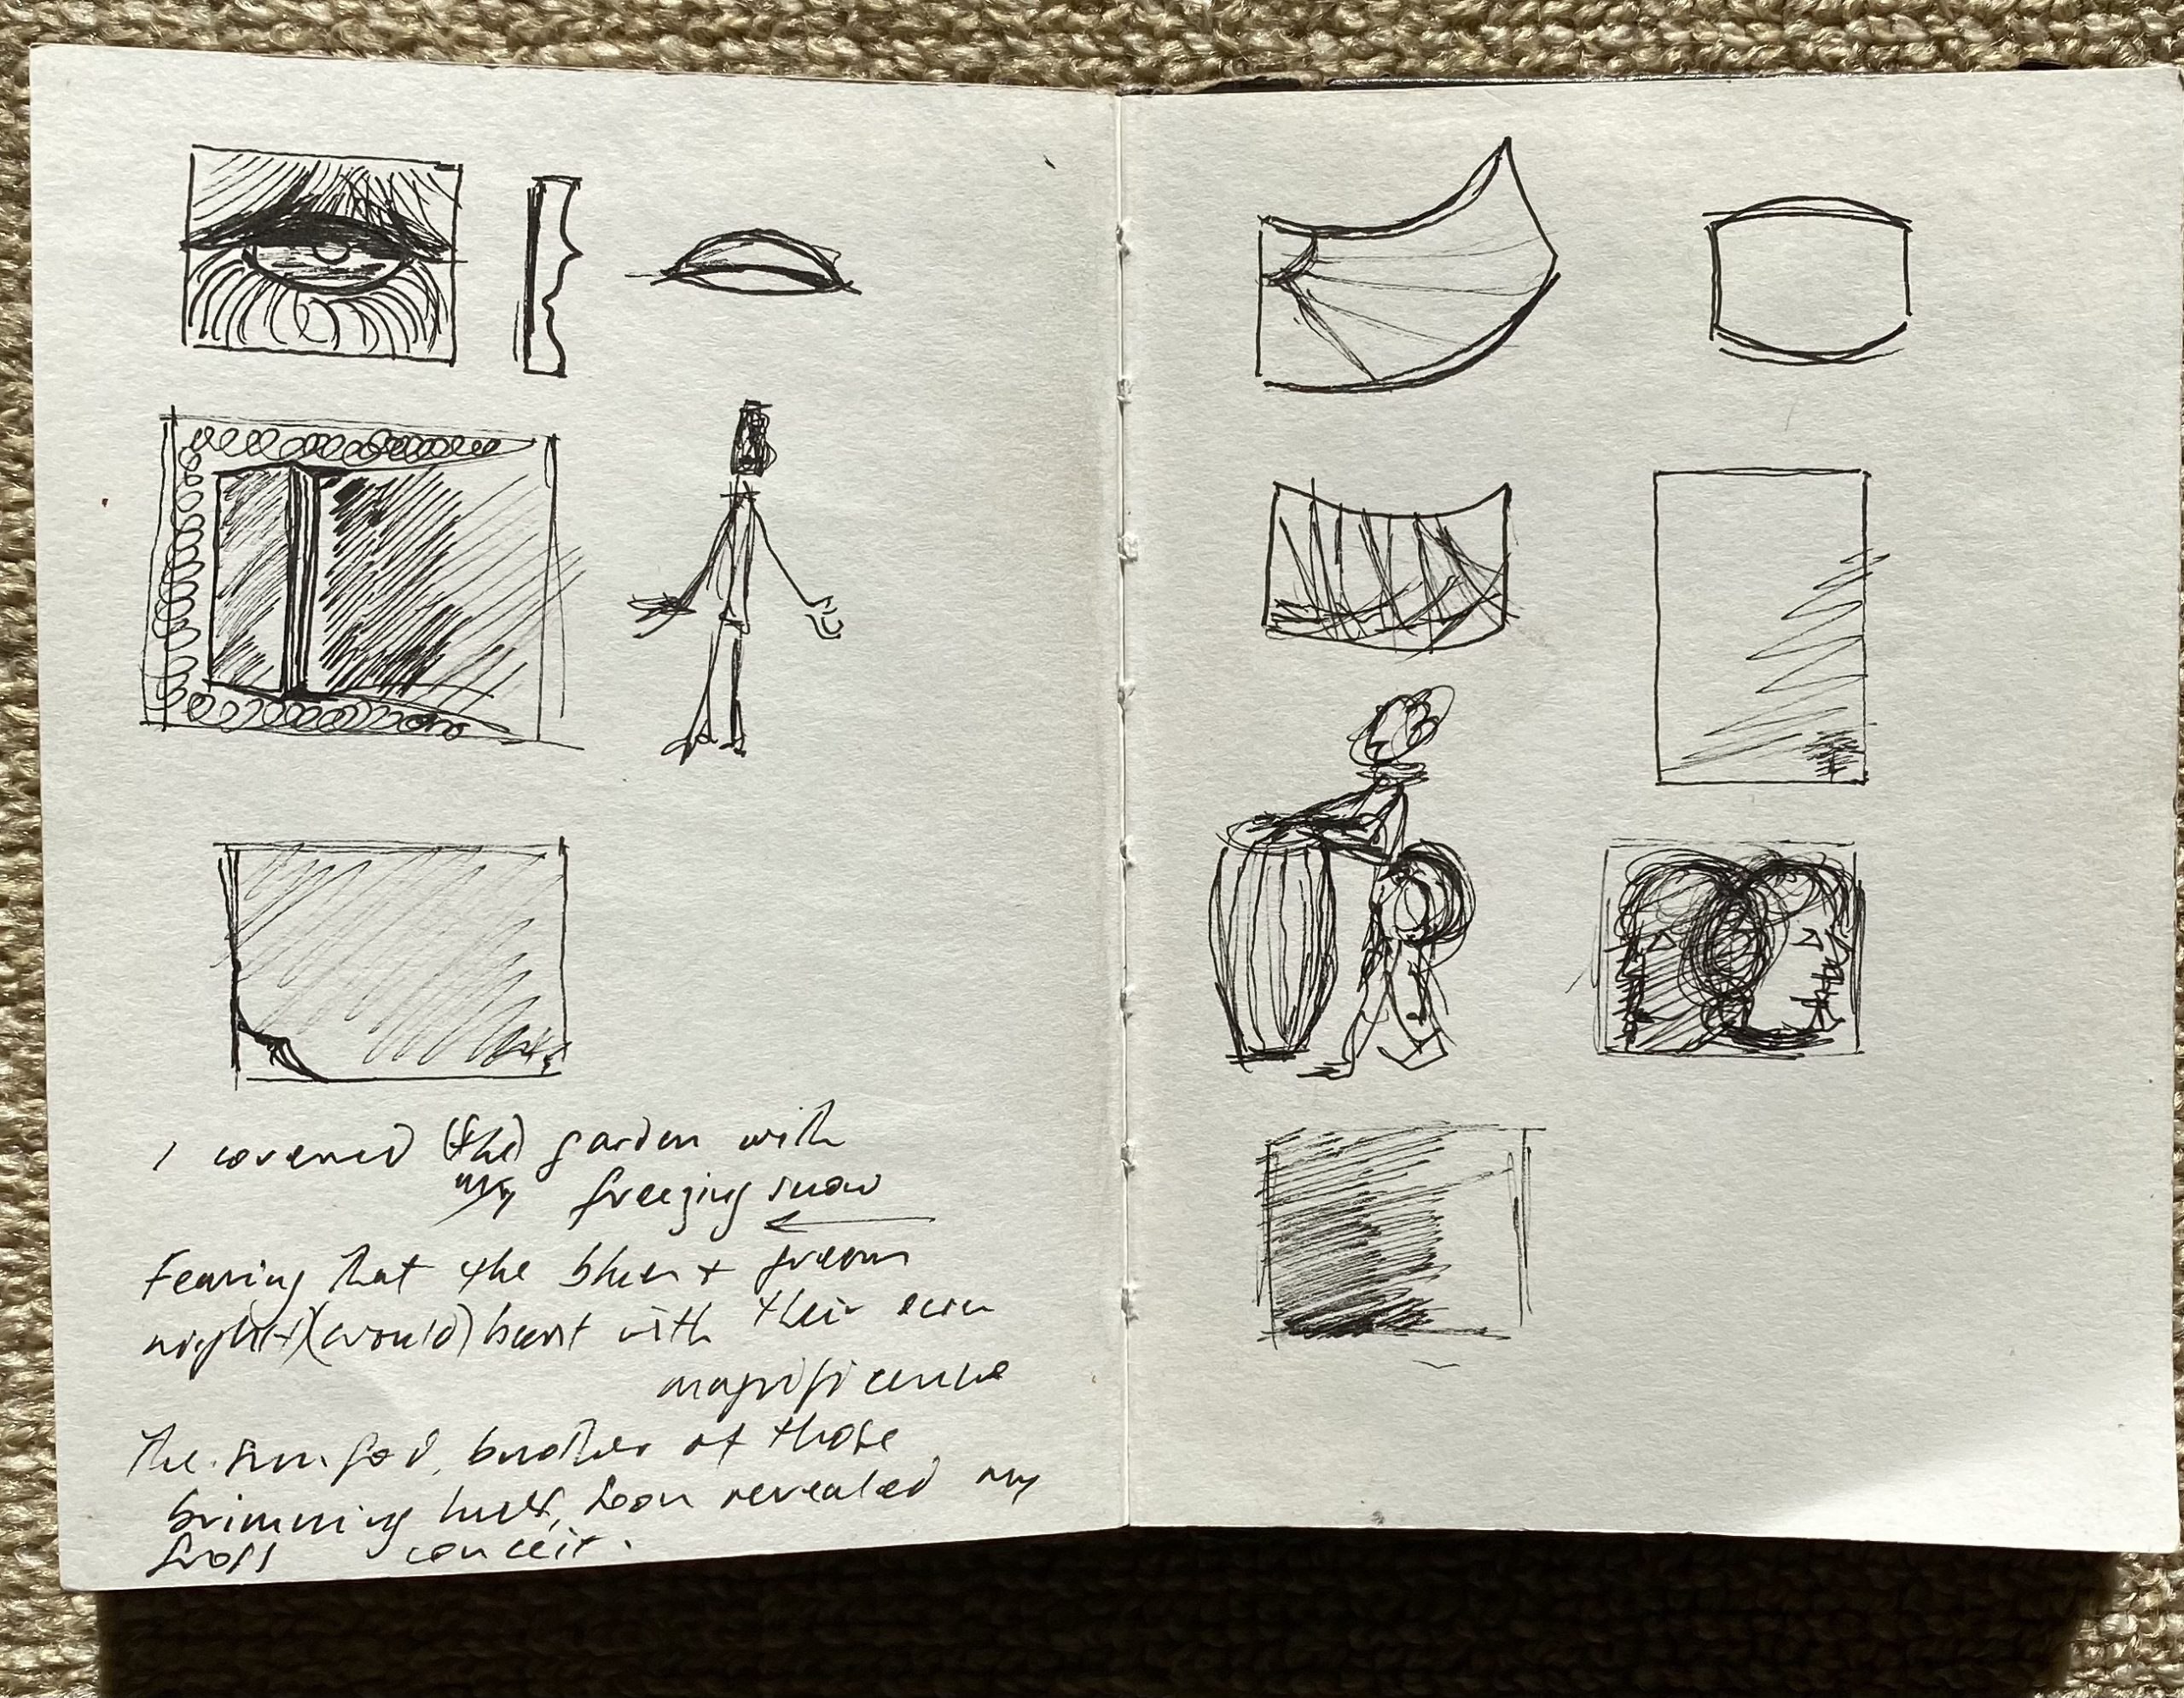 A sketchbook. The artist’s laboratory